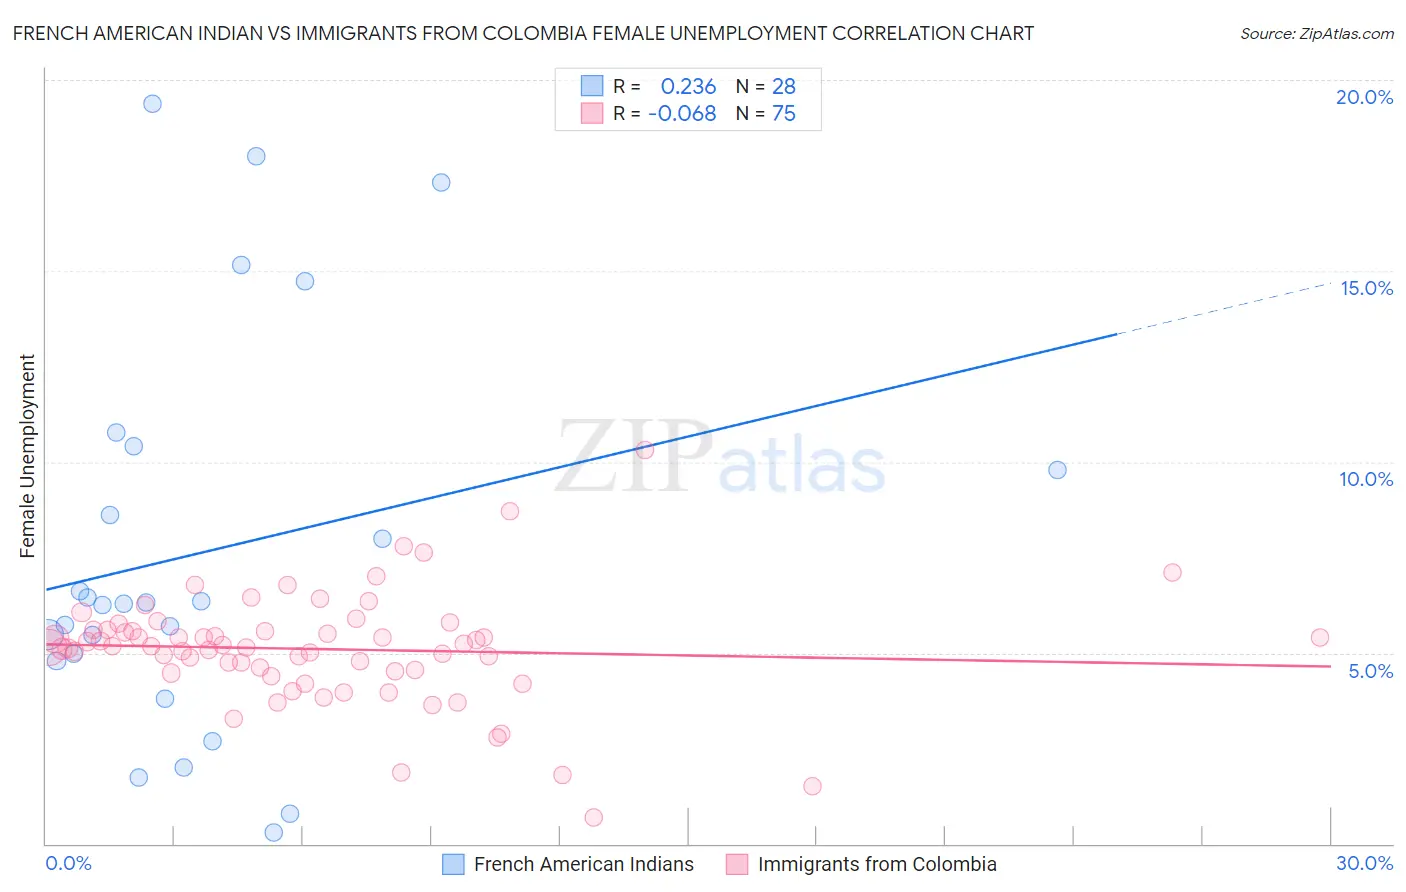 French American Indian vs Immigrants from Colombia Female Unemployment